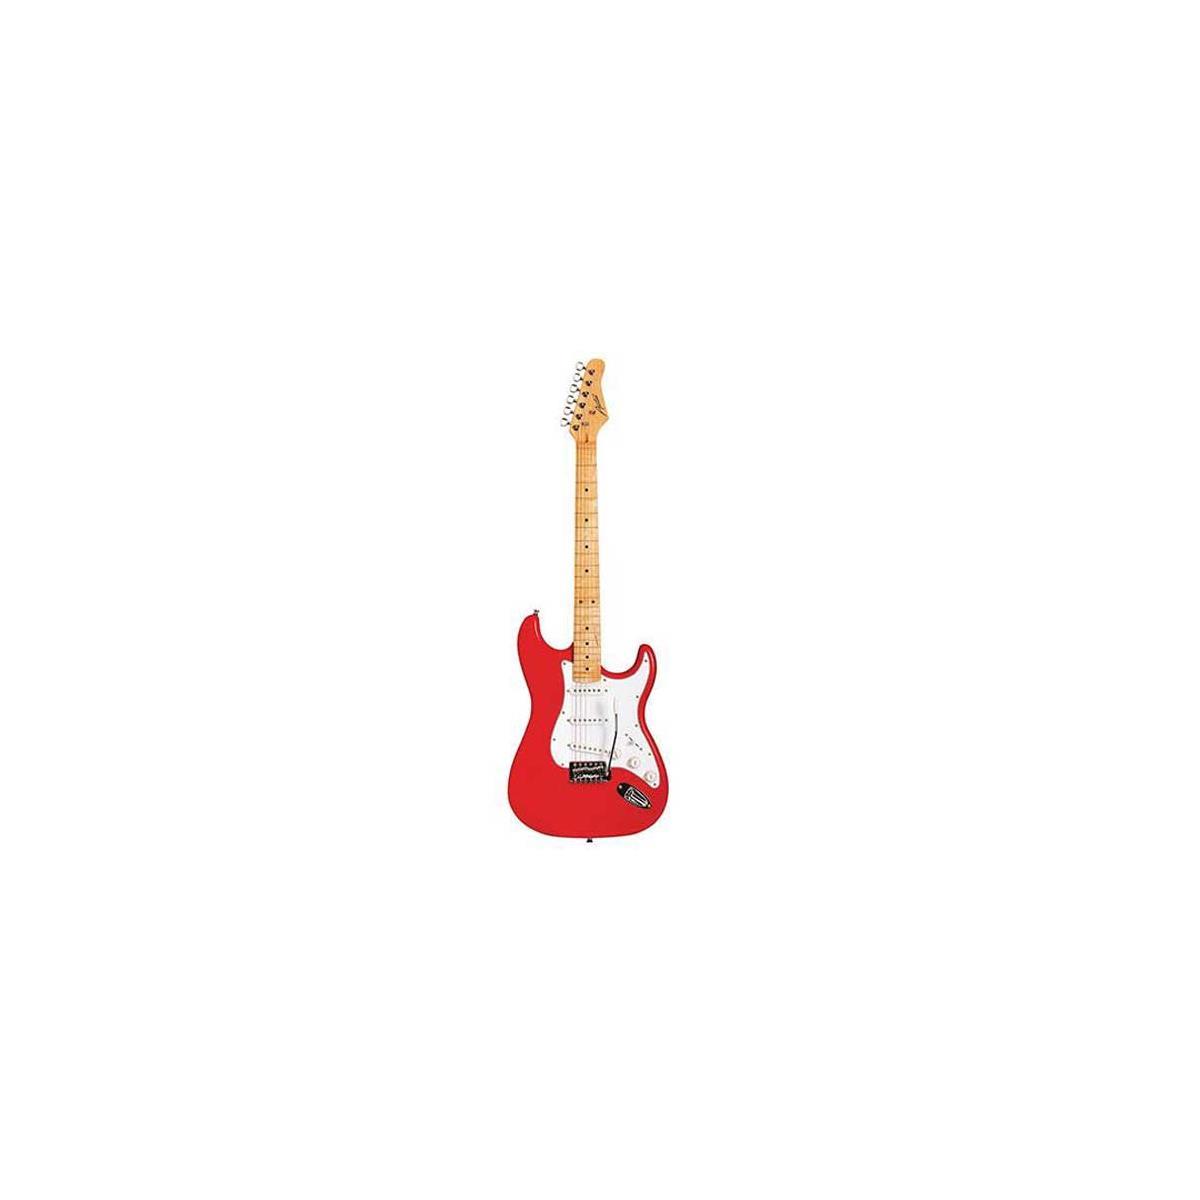 Austin AST100 Series Classic Double Cutaway Electric Guitar, Red -  AST100RD